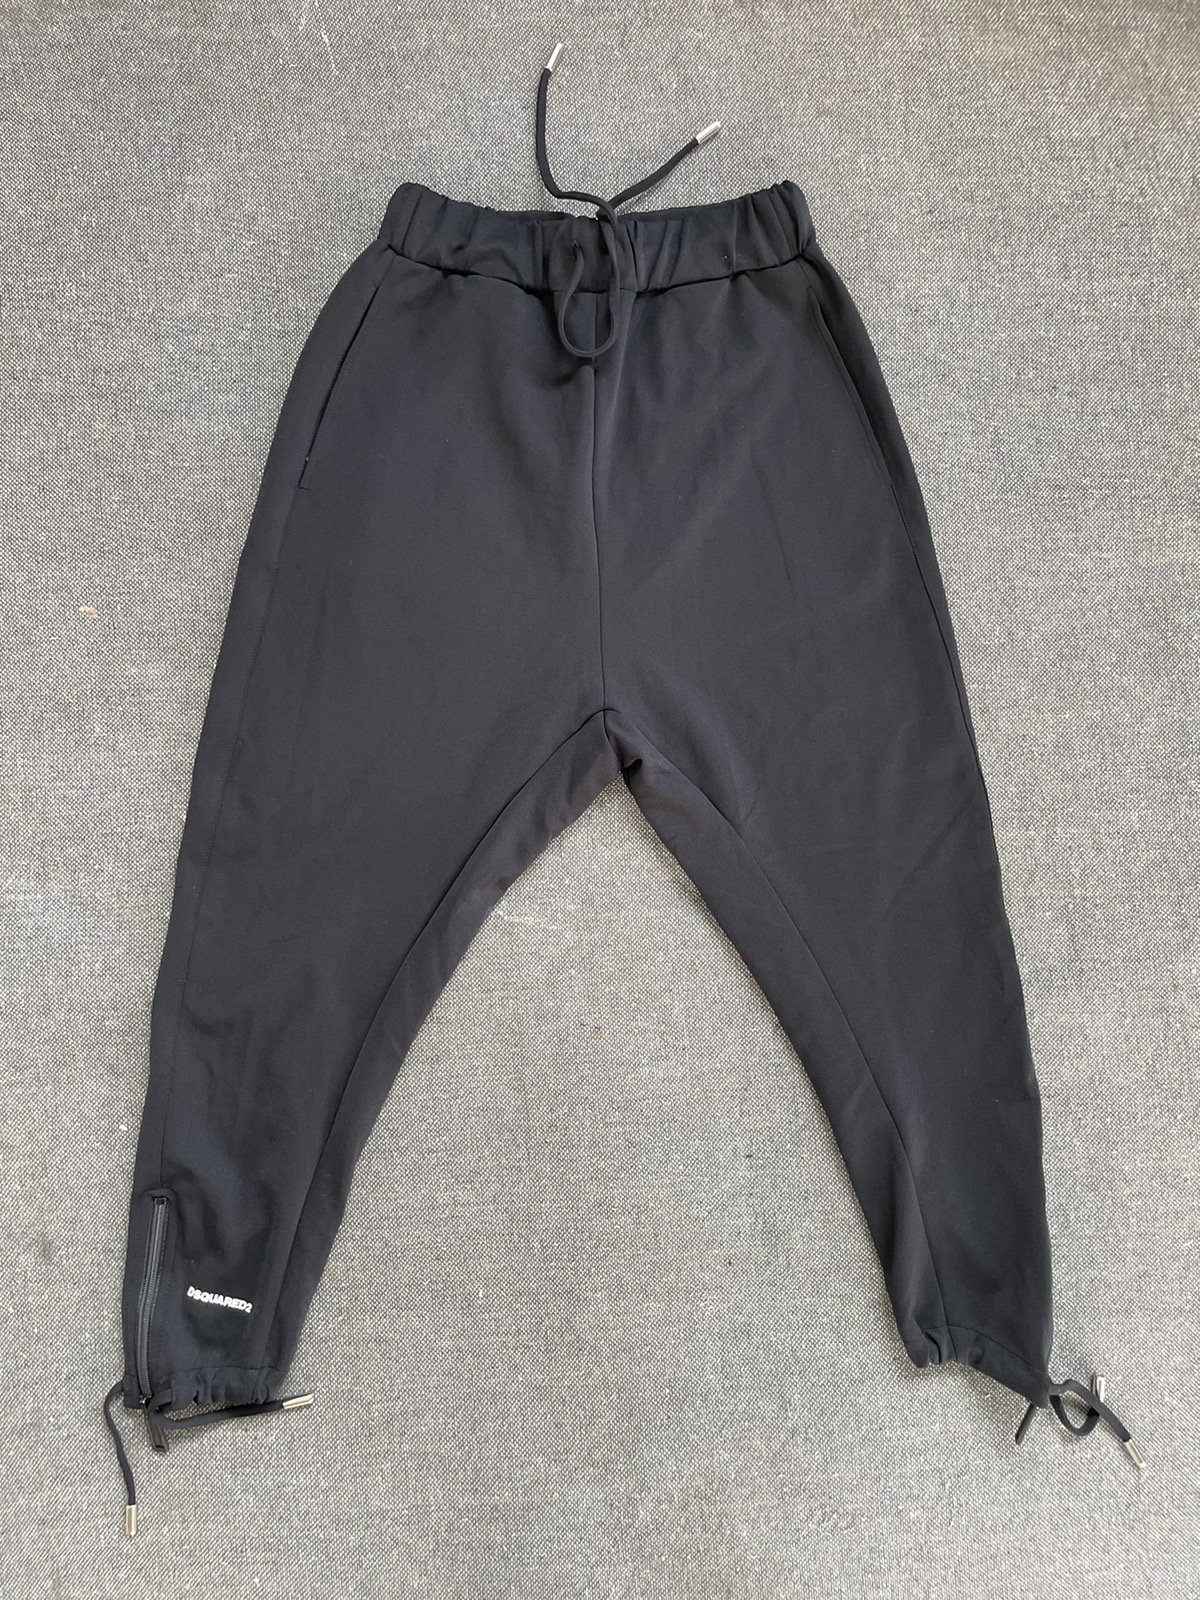 DSQUARED2 Sweatpants Like New Condition Made In Italy - 1